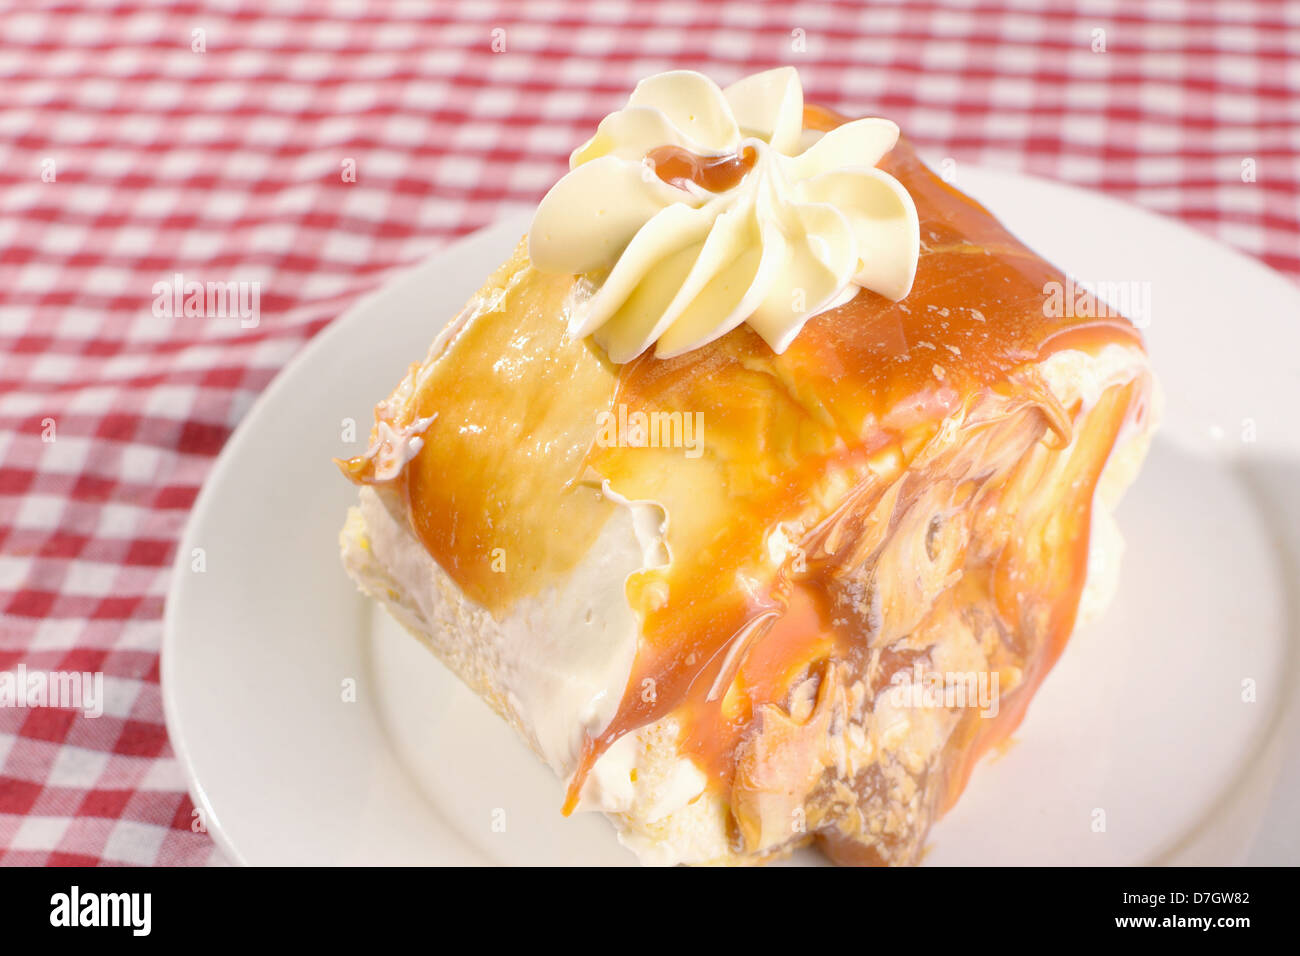 top angle photo of mouth-watering slice of dulce de leche roll with vanilla buttercream icing on top and caramel filling. Stock Photo